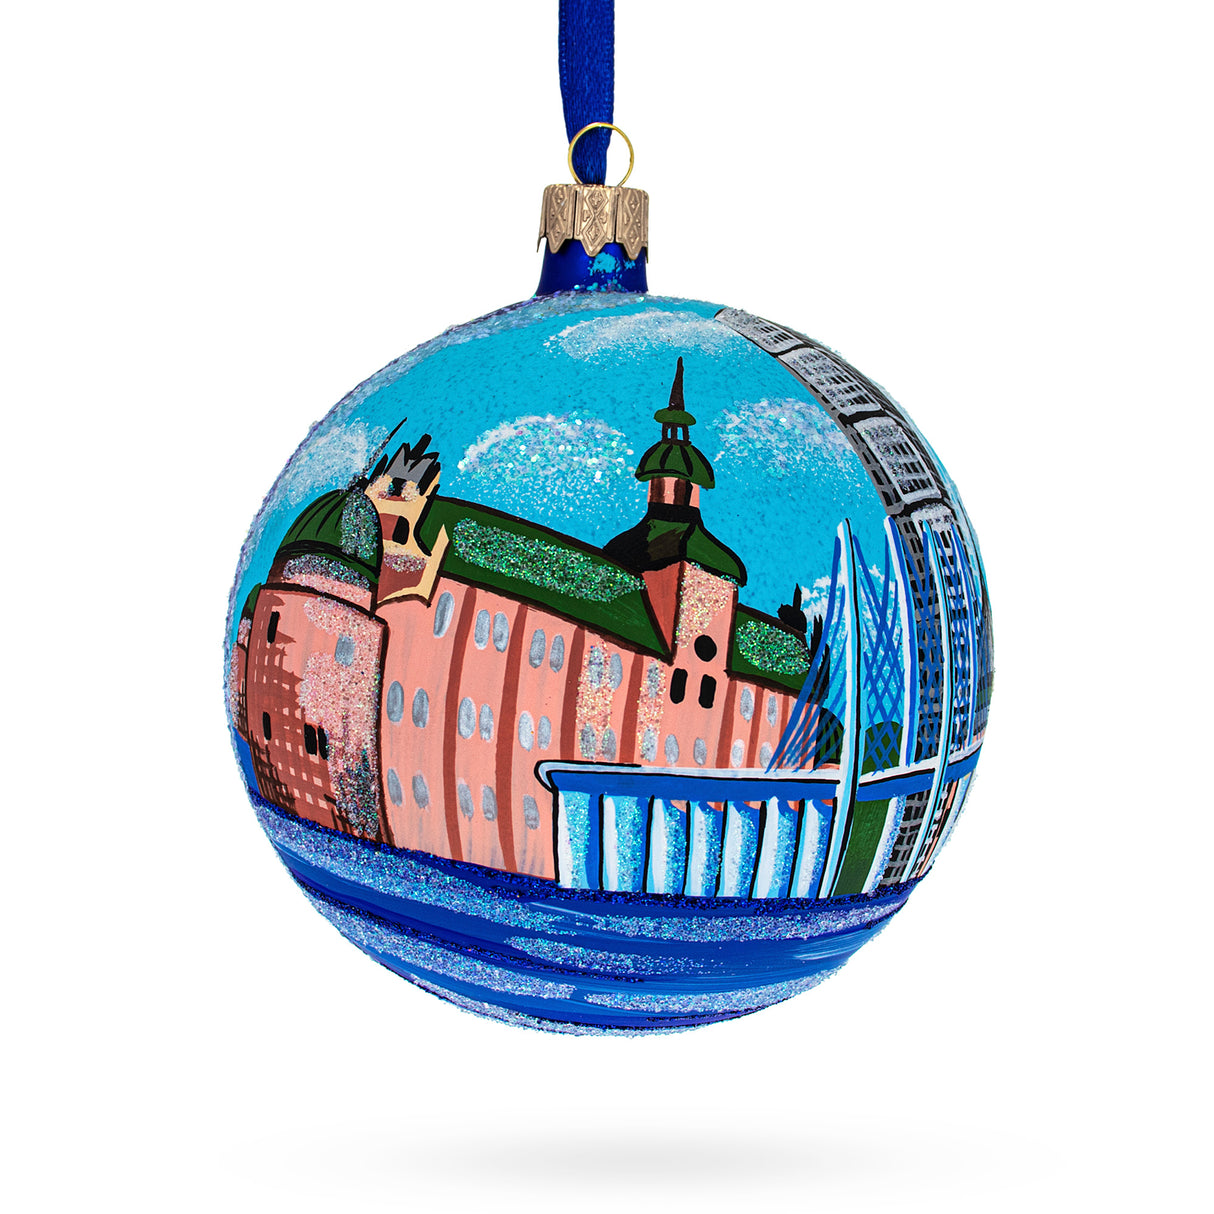 Vadstena Castle, Stockholm, Sweden Glass Ball Christmas Ornament 4 Inches in Blue color, Round shape